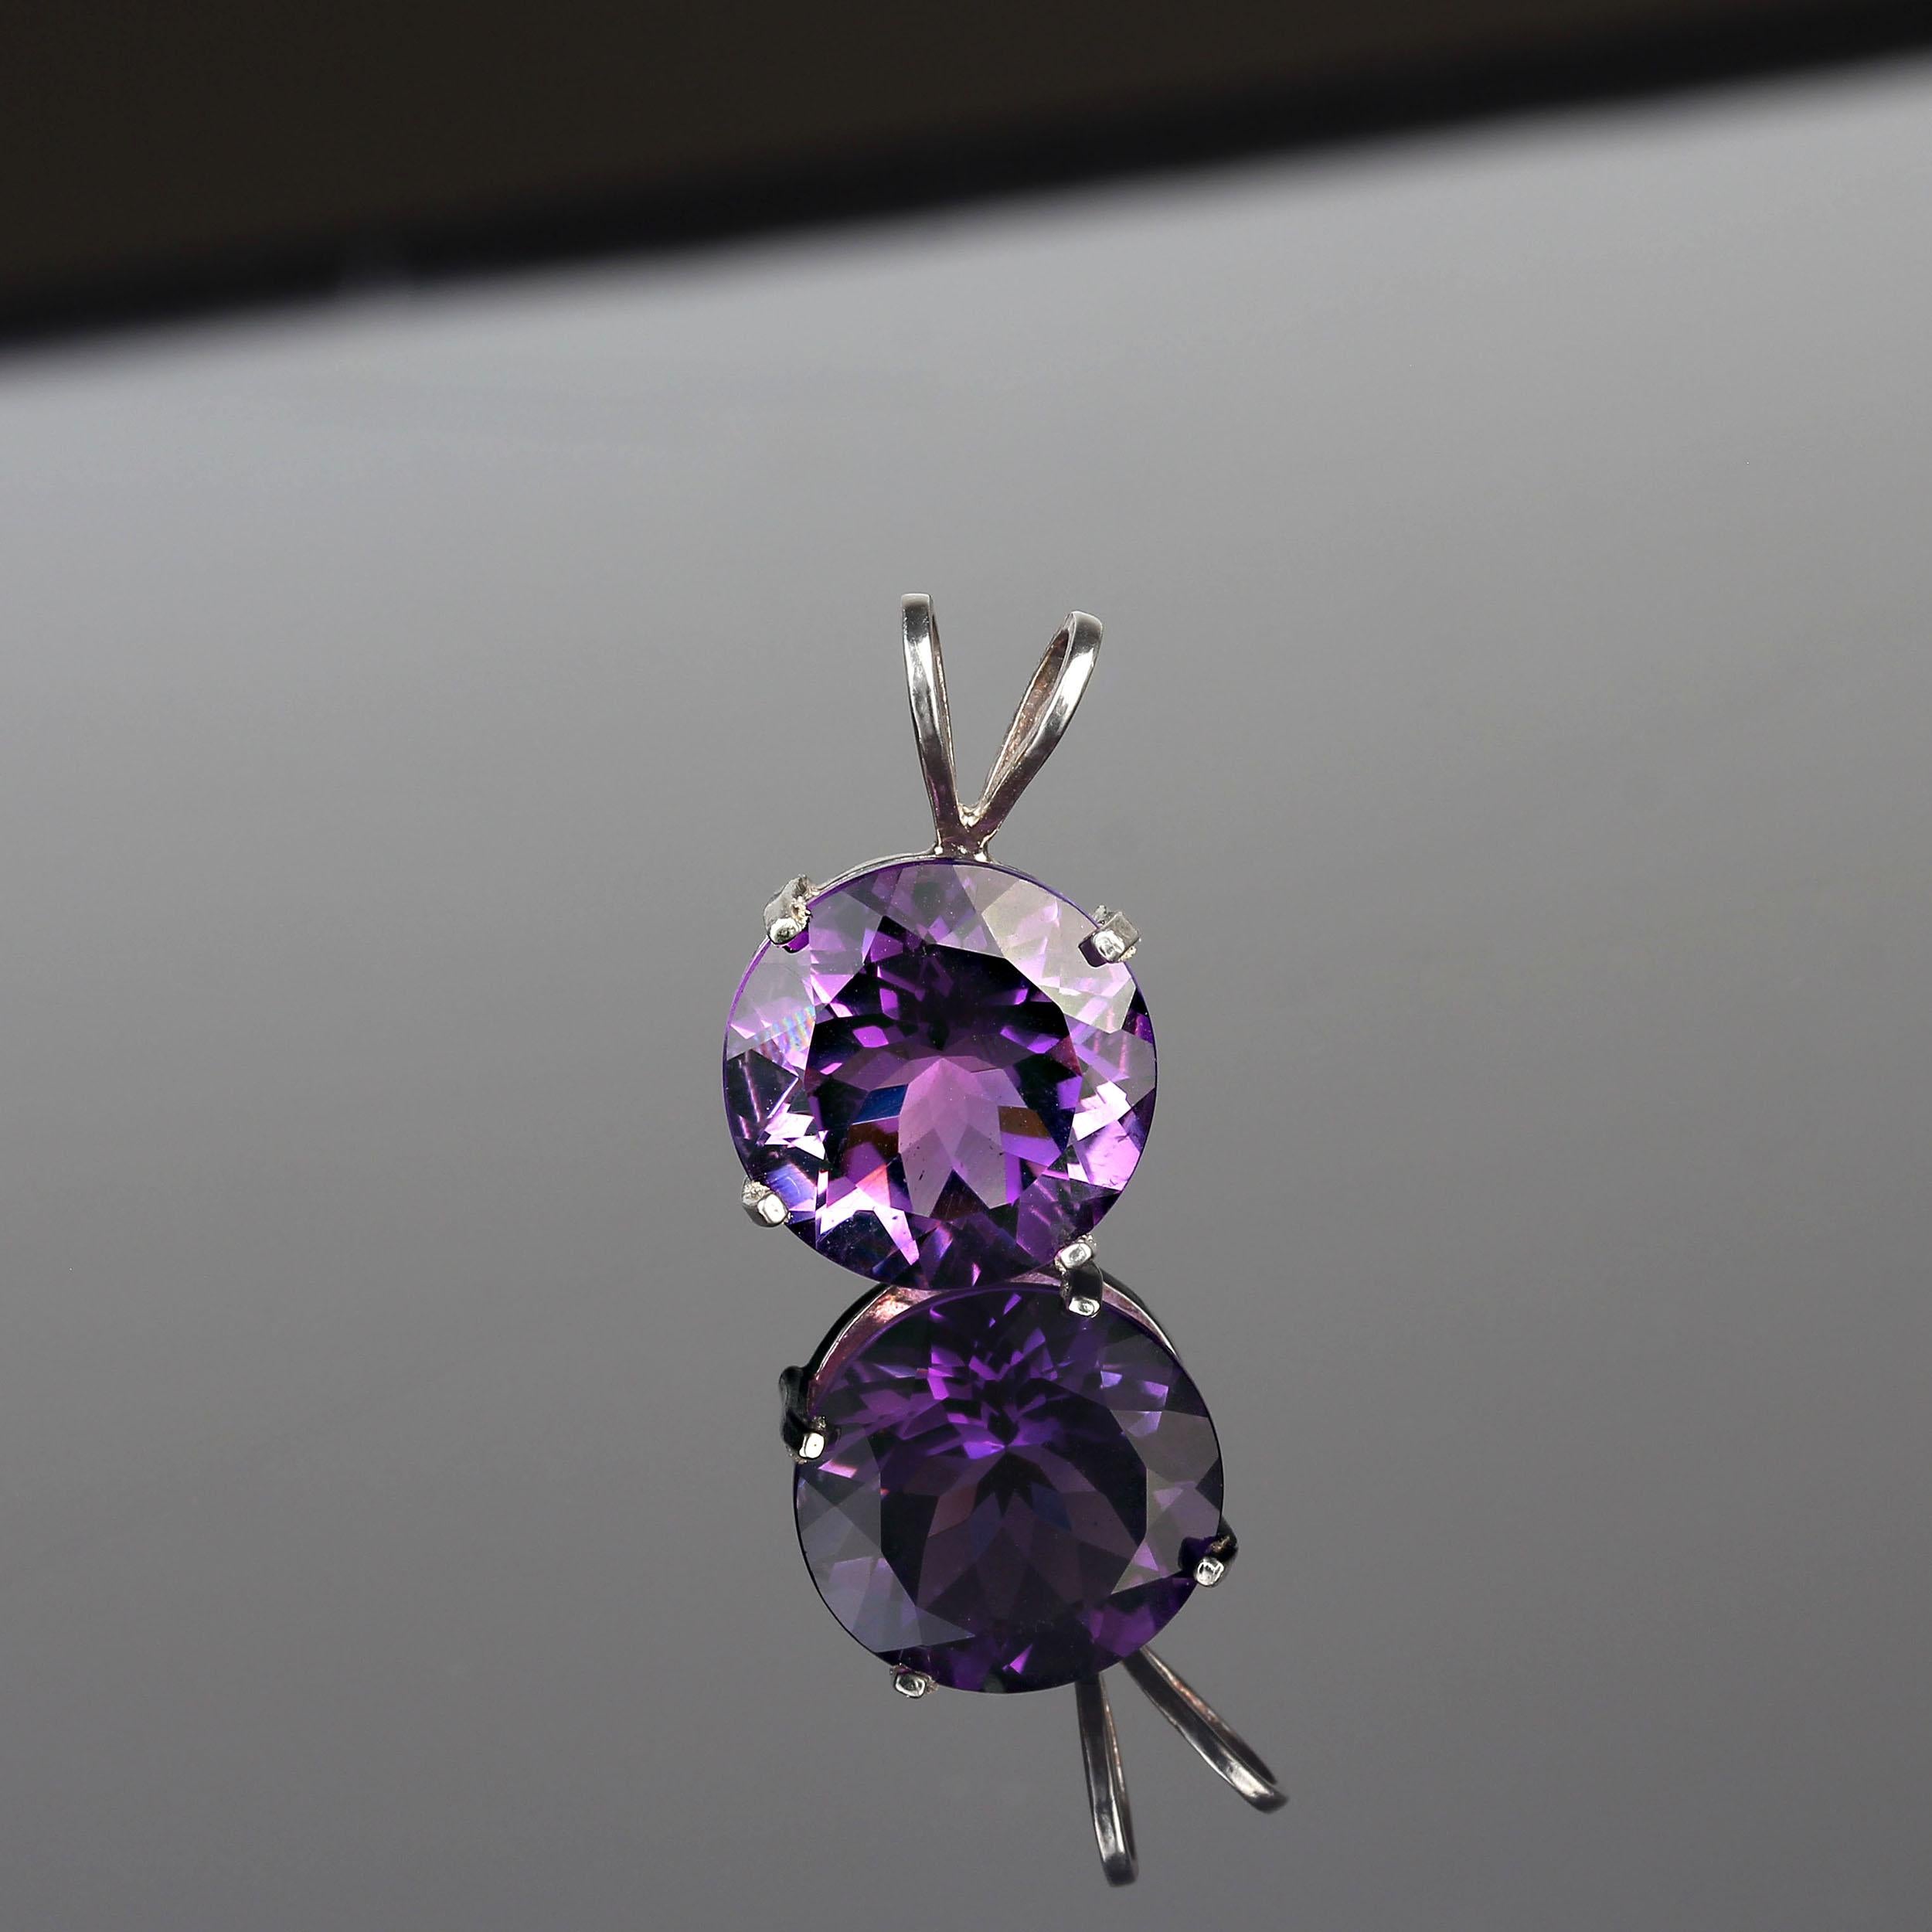 Round Cut AJD Sparkling Awesome Amethyst Sterling Silver Pendant February Birthstone!